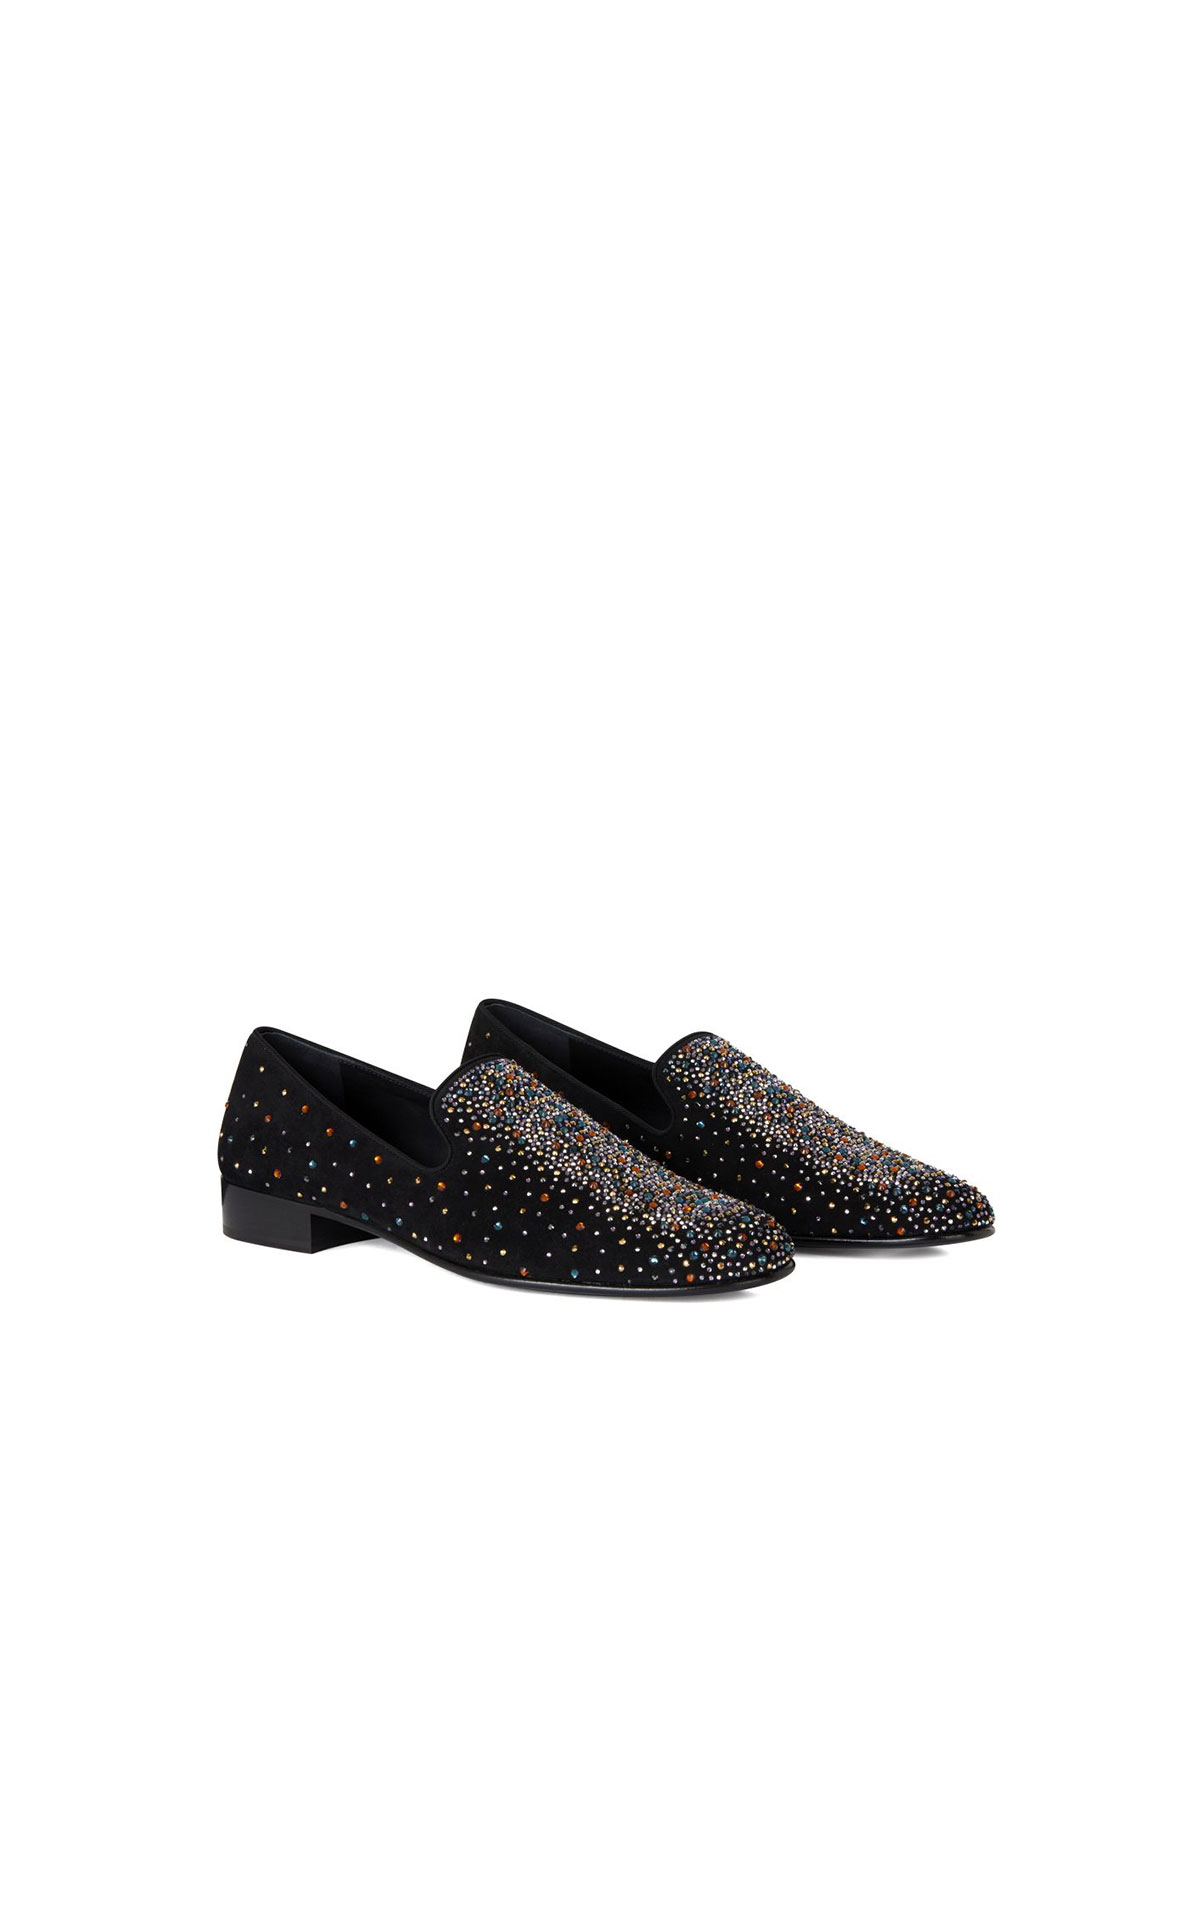 Giuseppe Zannotti Lewis special loafer from Bicester Village